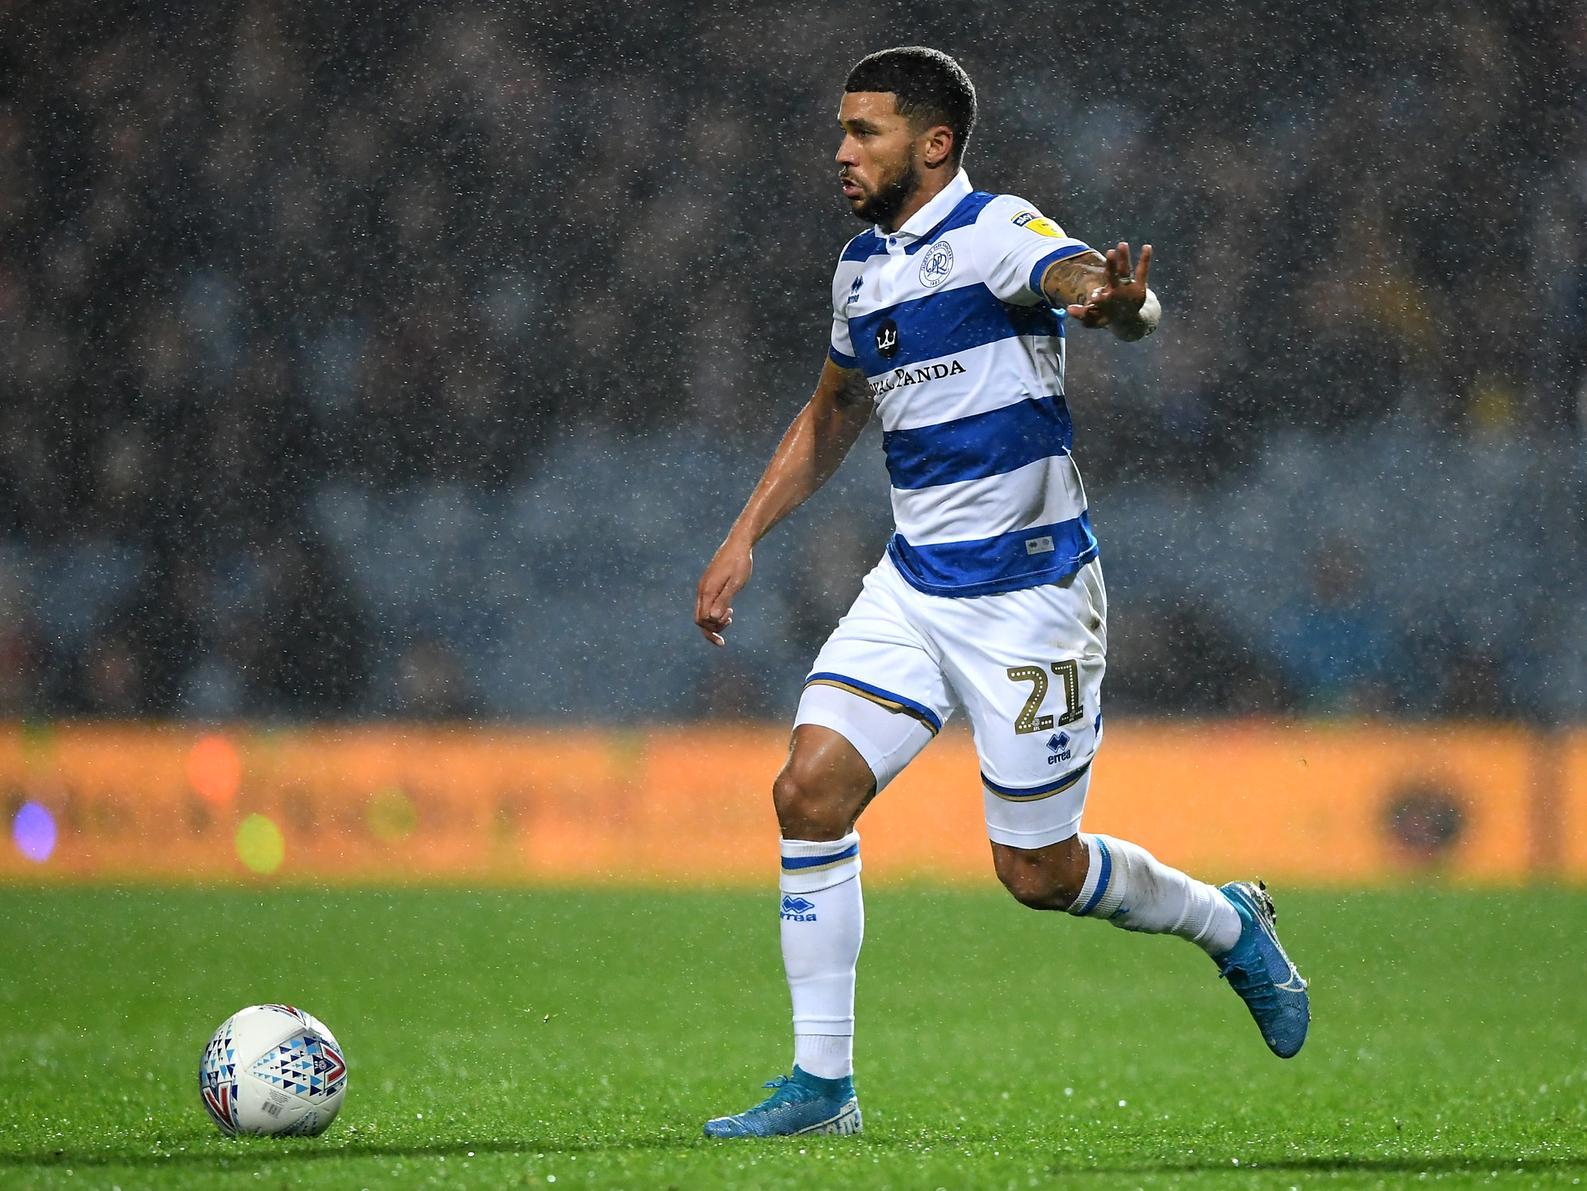 Bristol City's search for a striker could see them make a move for Burnley's Nahki Wells, while Charlton Athletic sensation Lyle Taylor is also said to be of interest. (Bristol Post)